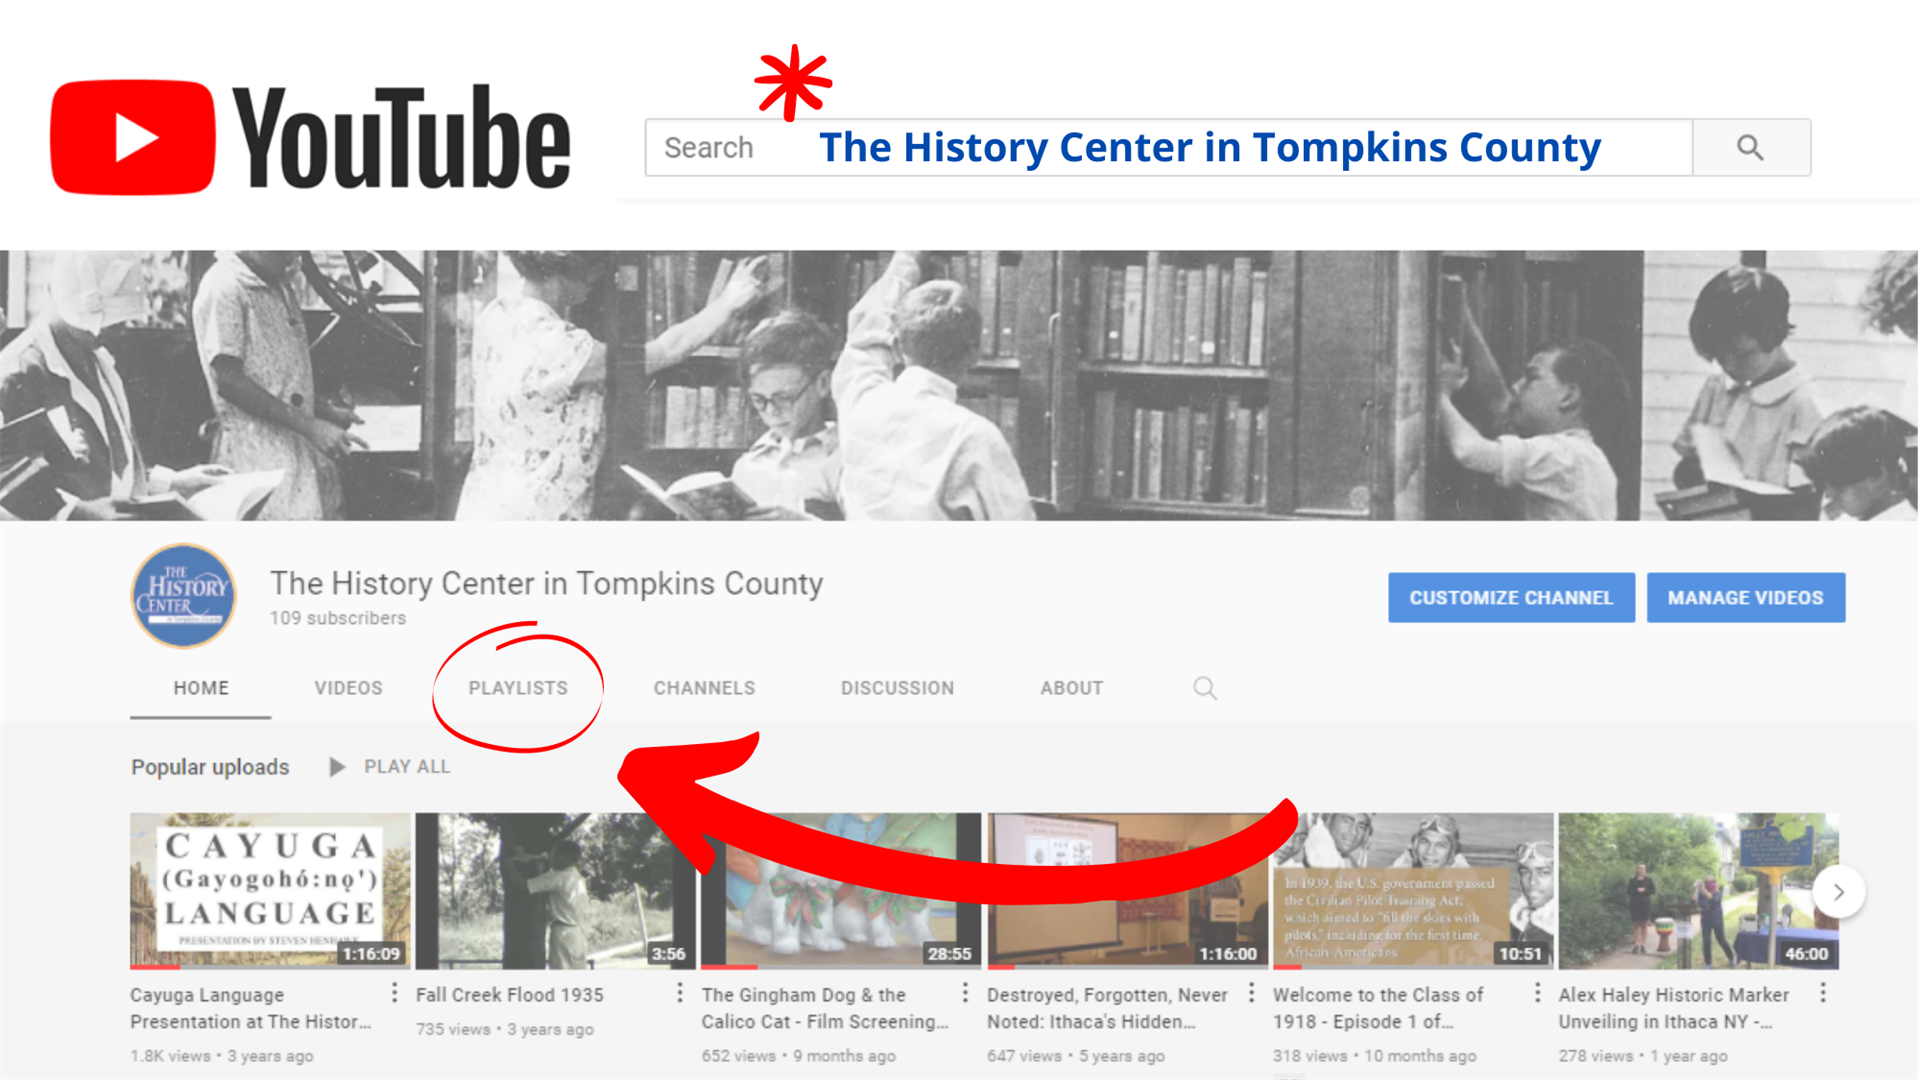 A screenshot of the youtube channel of The History Center, which is called "The History Center in Tompkins County". The image features a red arrow pointing towards the playlists.